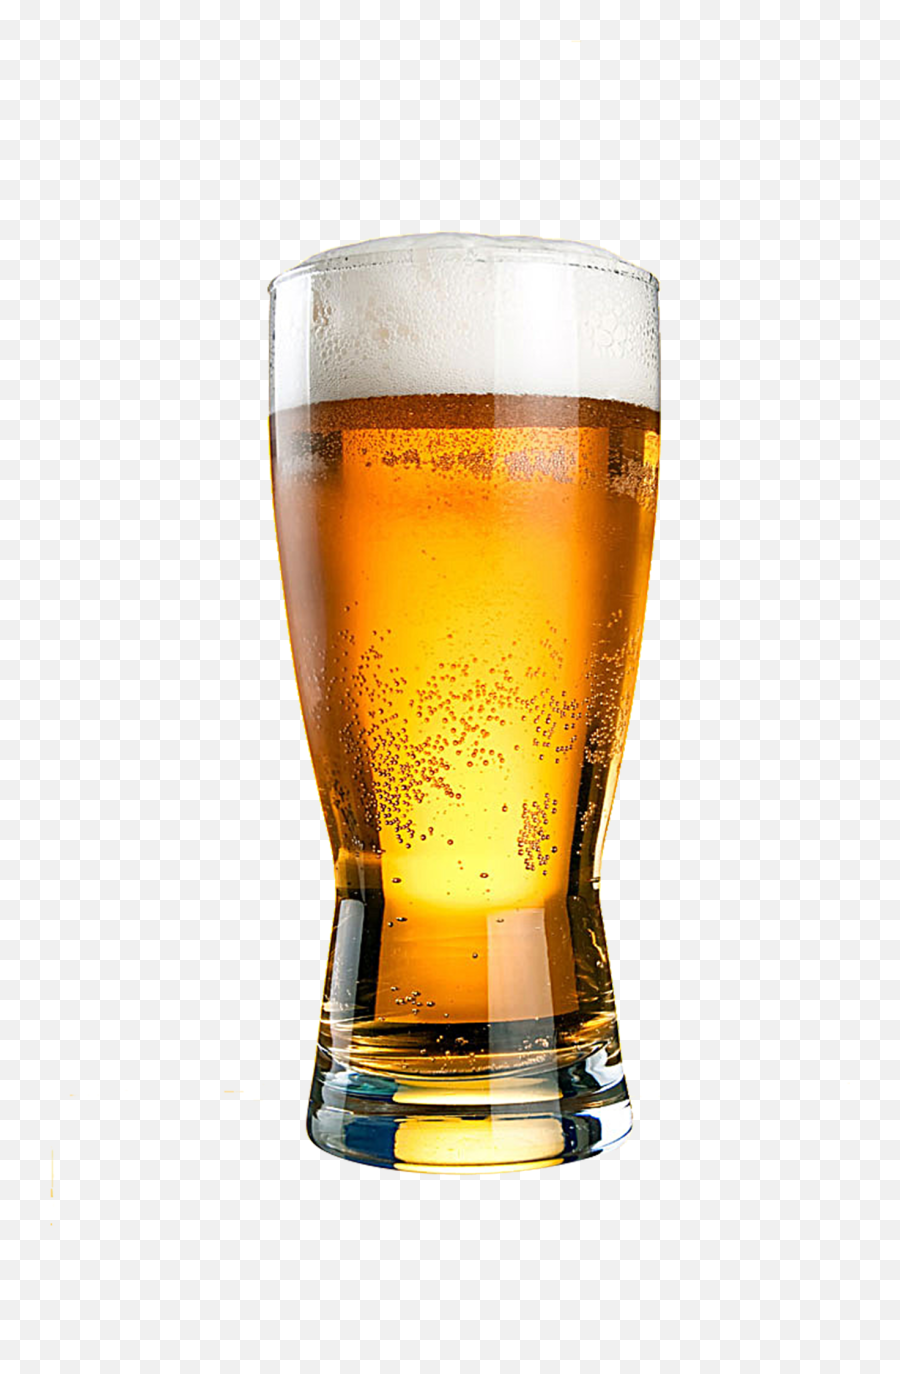 Cheers And Beers Transparent Background - Transparent Background Glass Of Beer Emoji,Beer Emoji Png